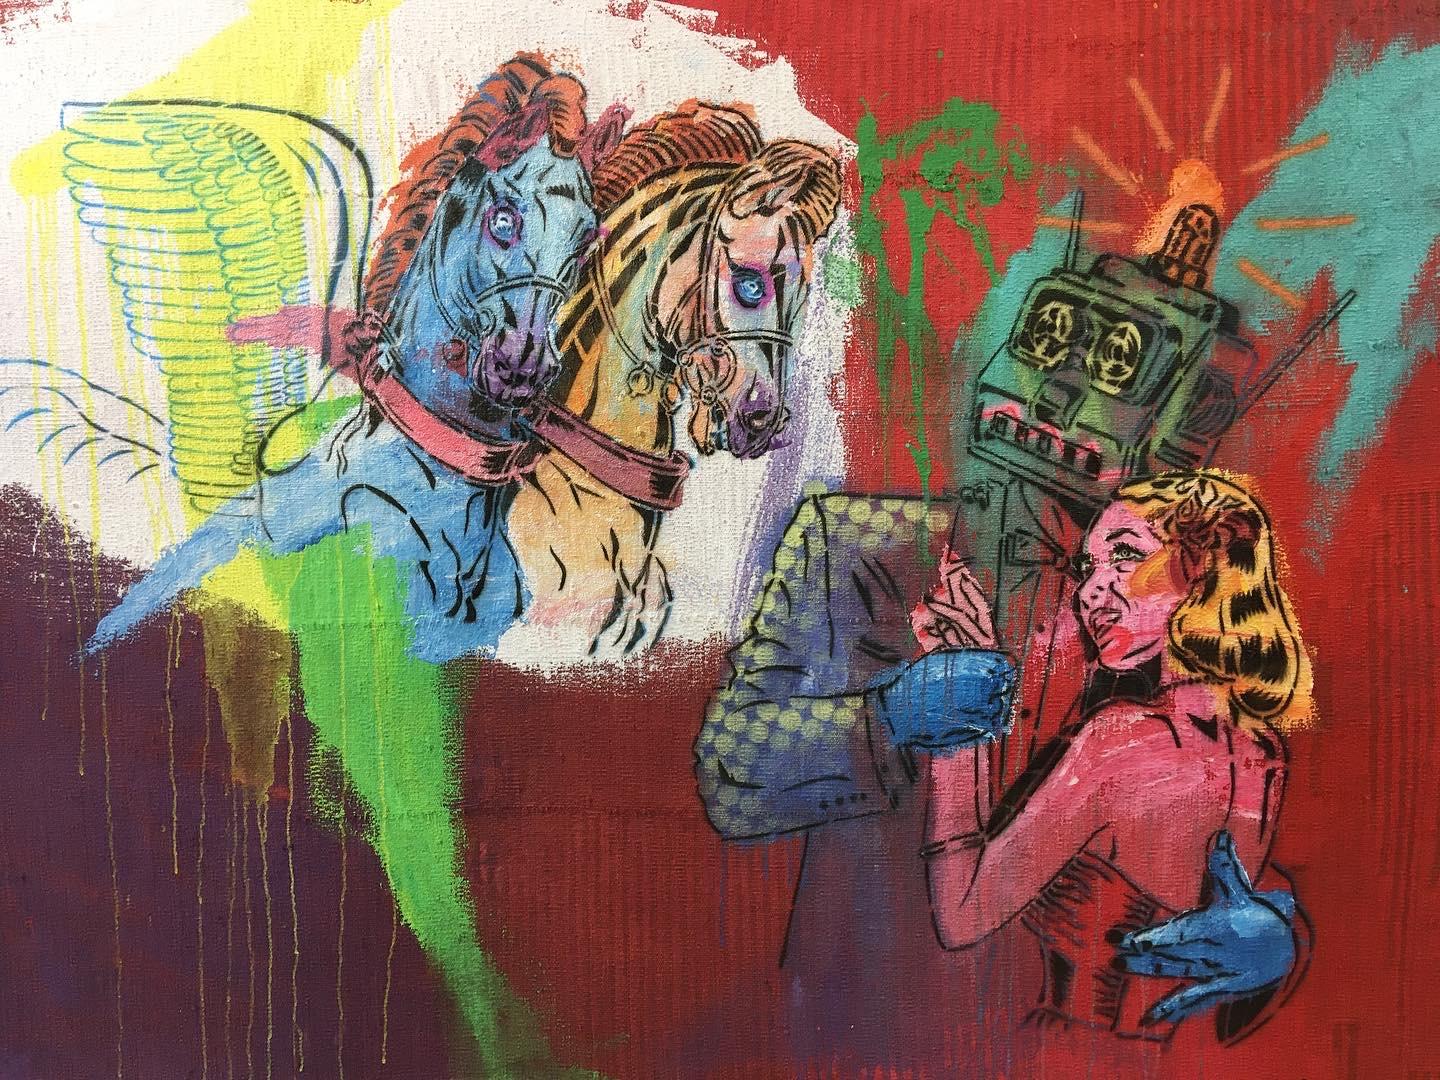 "Love with a Robot and a Two-Headed Pegasus" 81" x 59" inch by Gosha Ostretsov

Medium: Carpet, Wool, acrylic, varnish

Ships rolled in a tube 

Born in 1967, in Moscow
Lived in Paris for ten years (1988 - 1998), now lives and works in